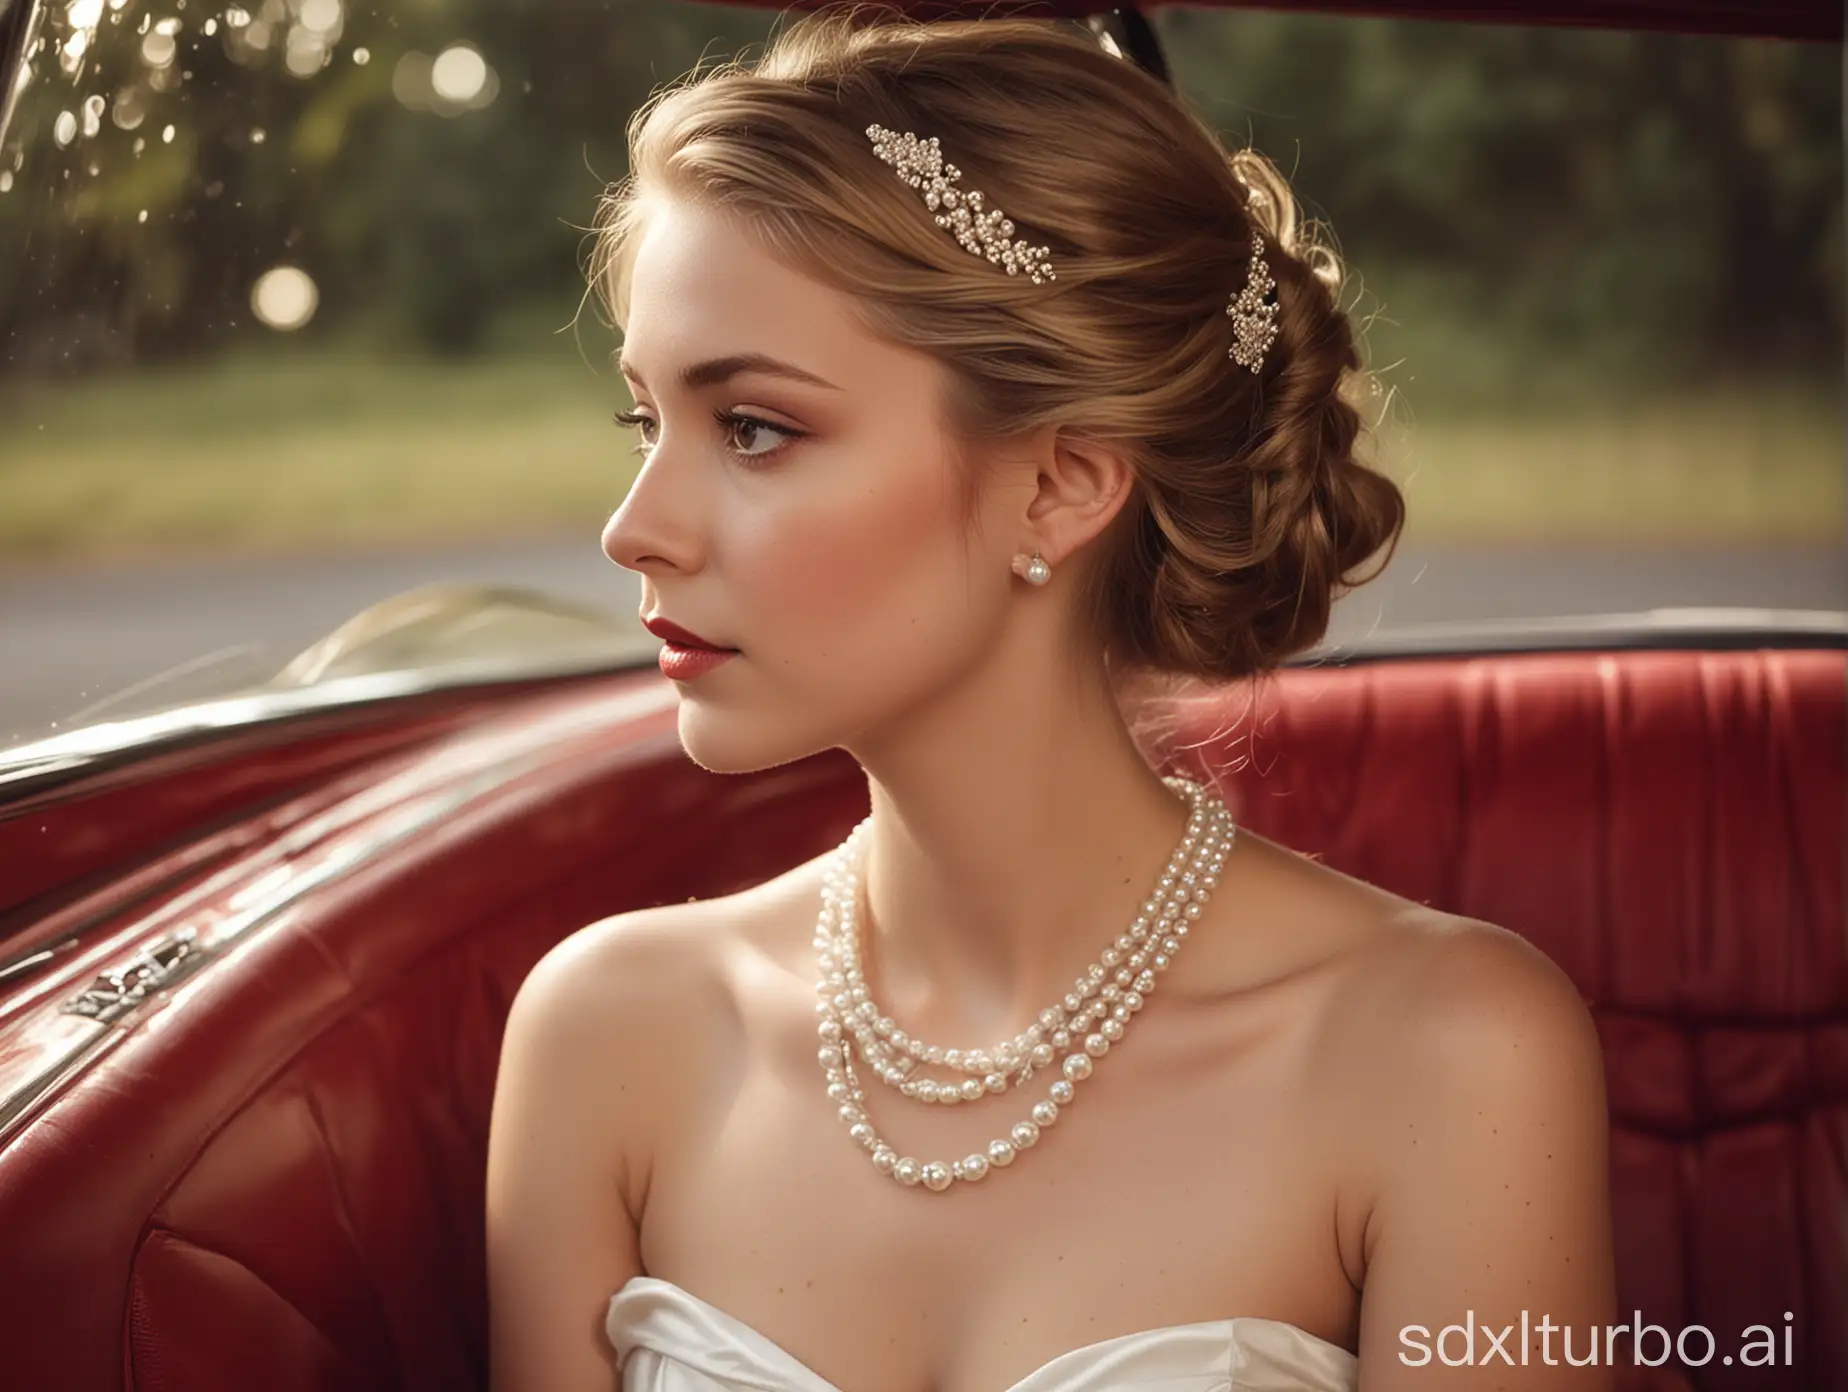 Vintage-Girl-in-Red-Car-Serene-Elegance-and-Classic-Charm